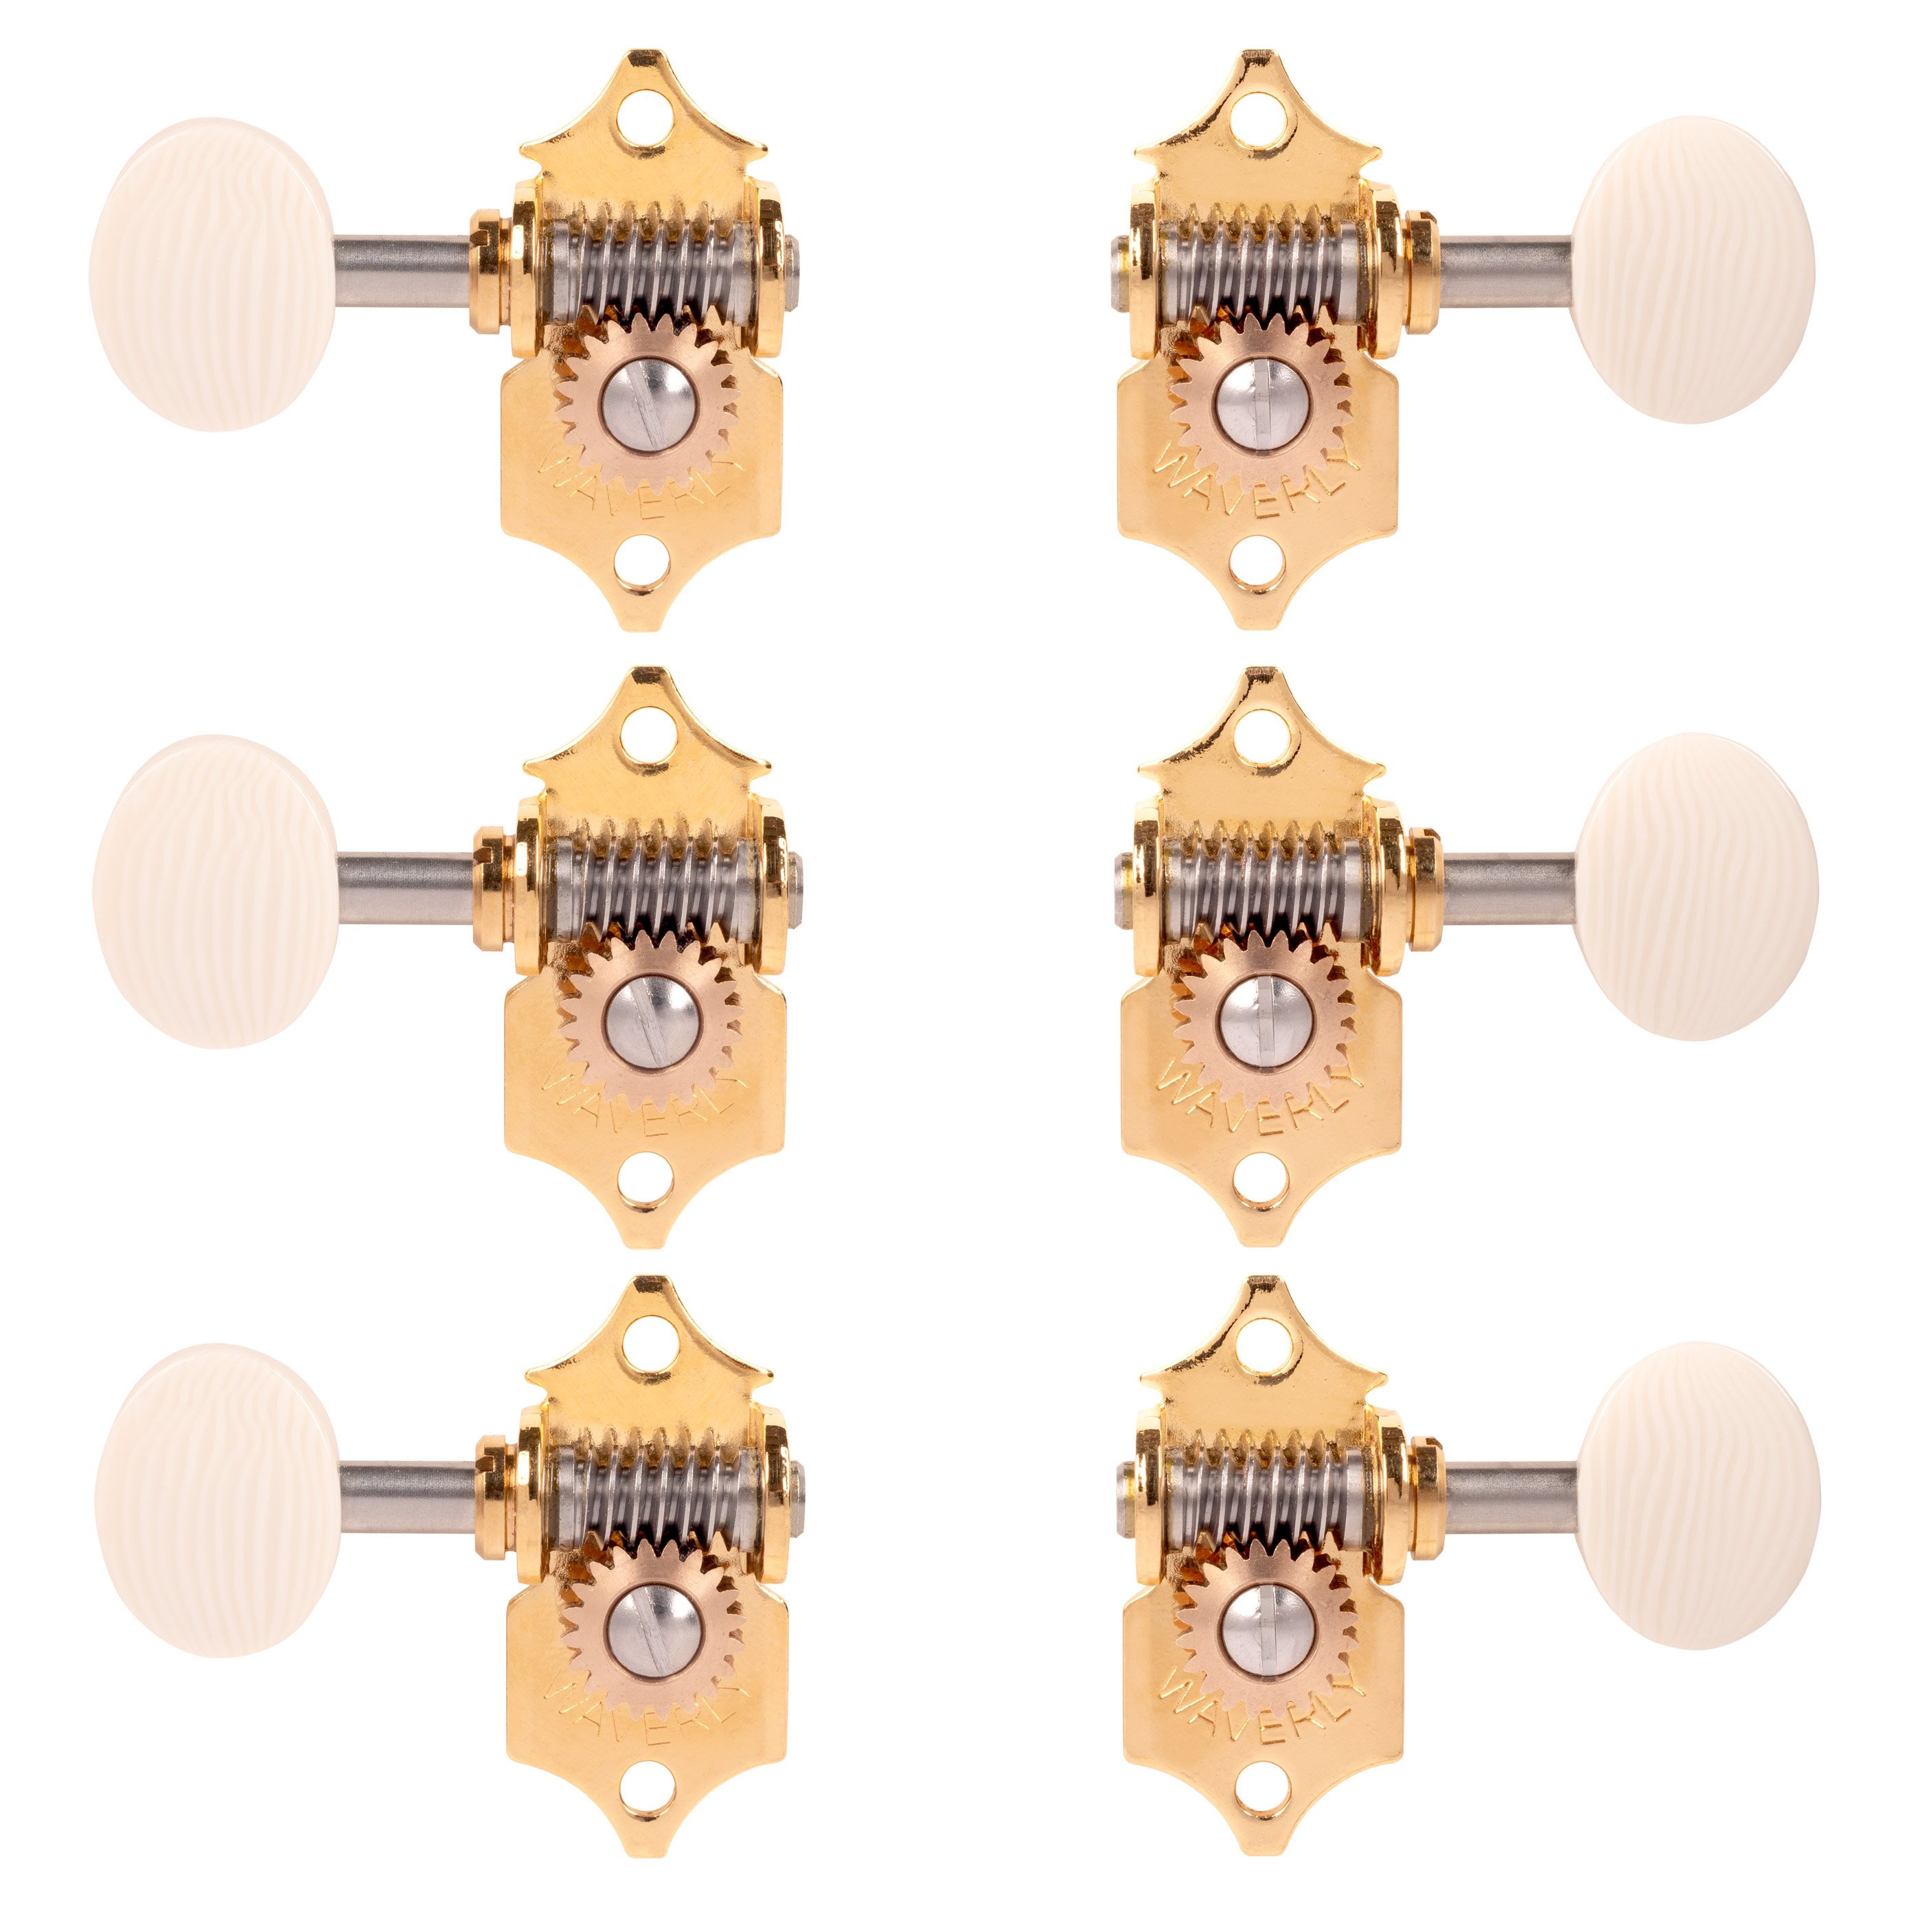 Waverly High Ratio Guitar Tuners with Ivoroid Knobs for Solid Pegheads